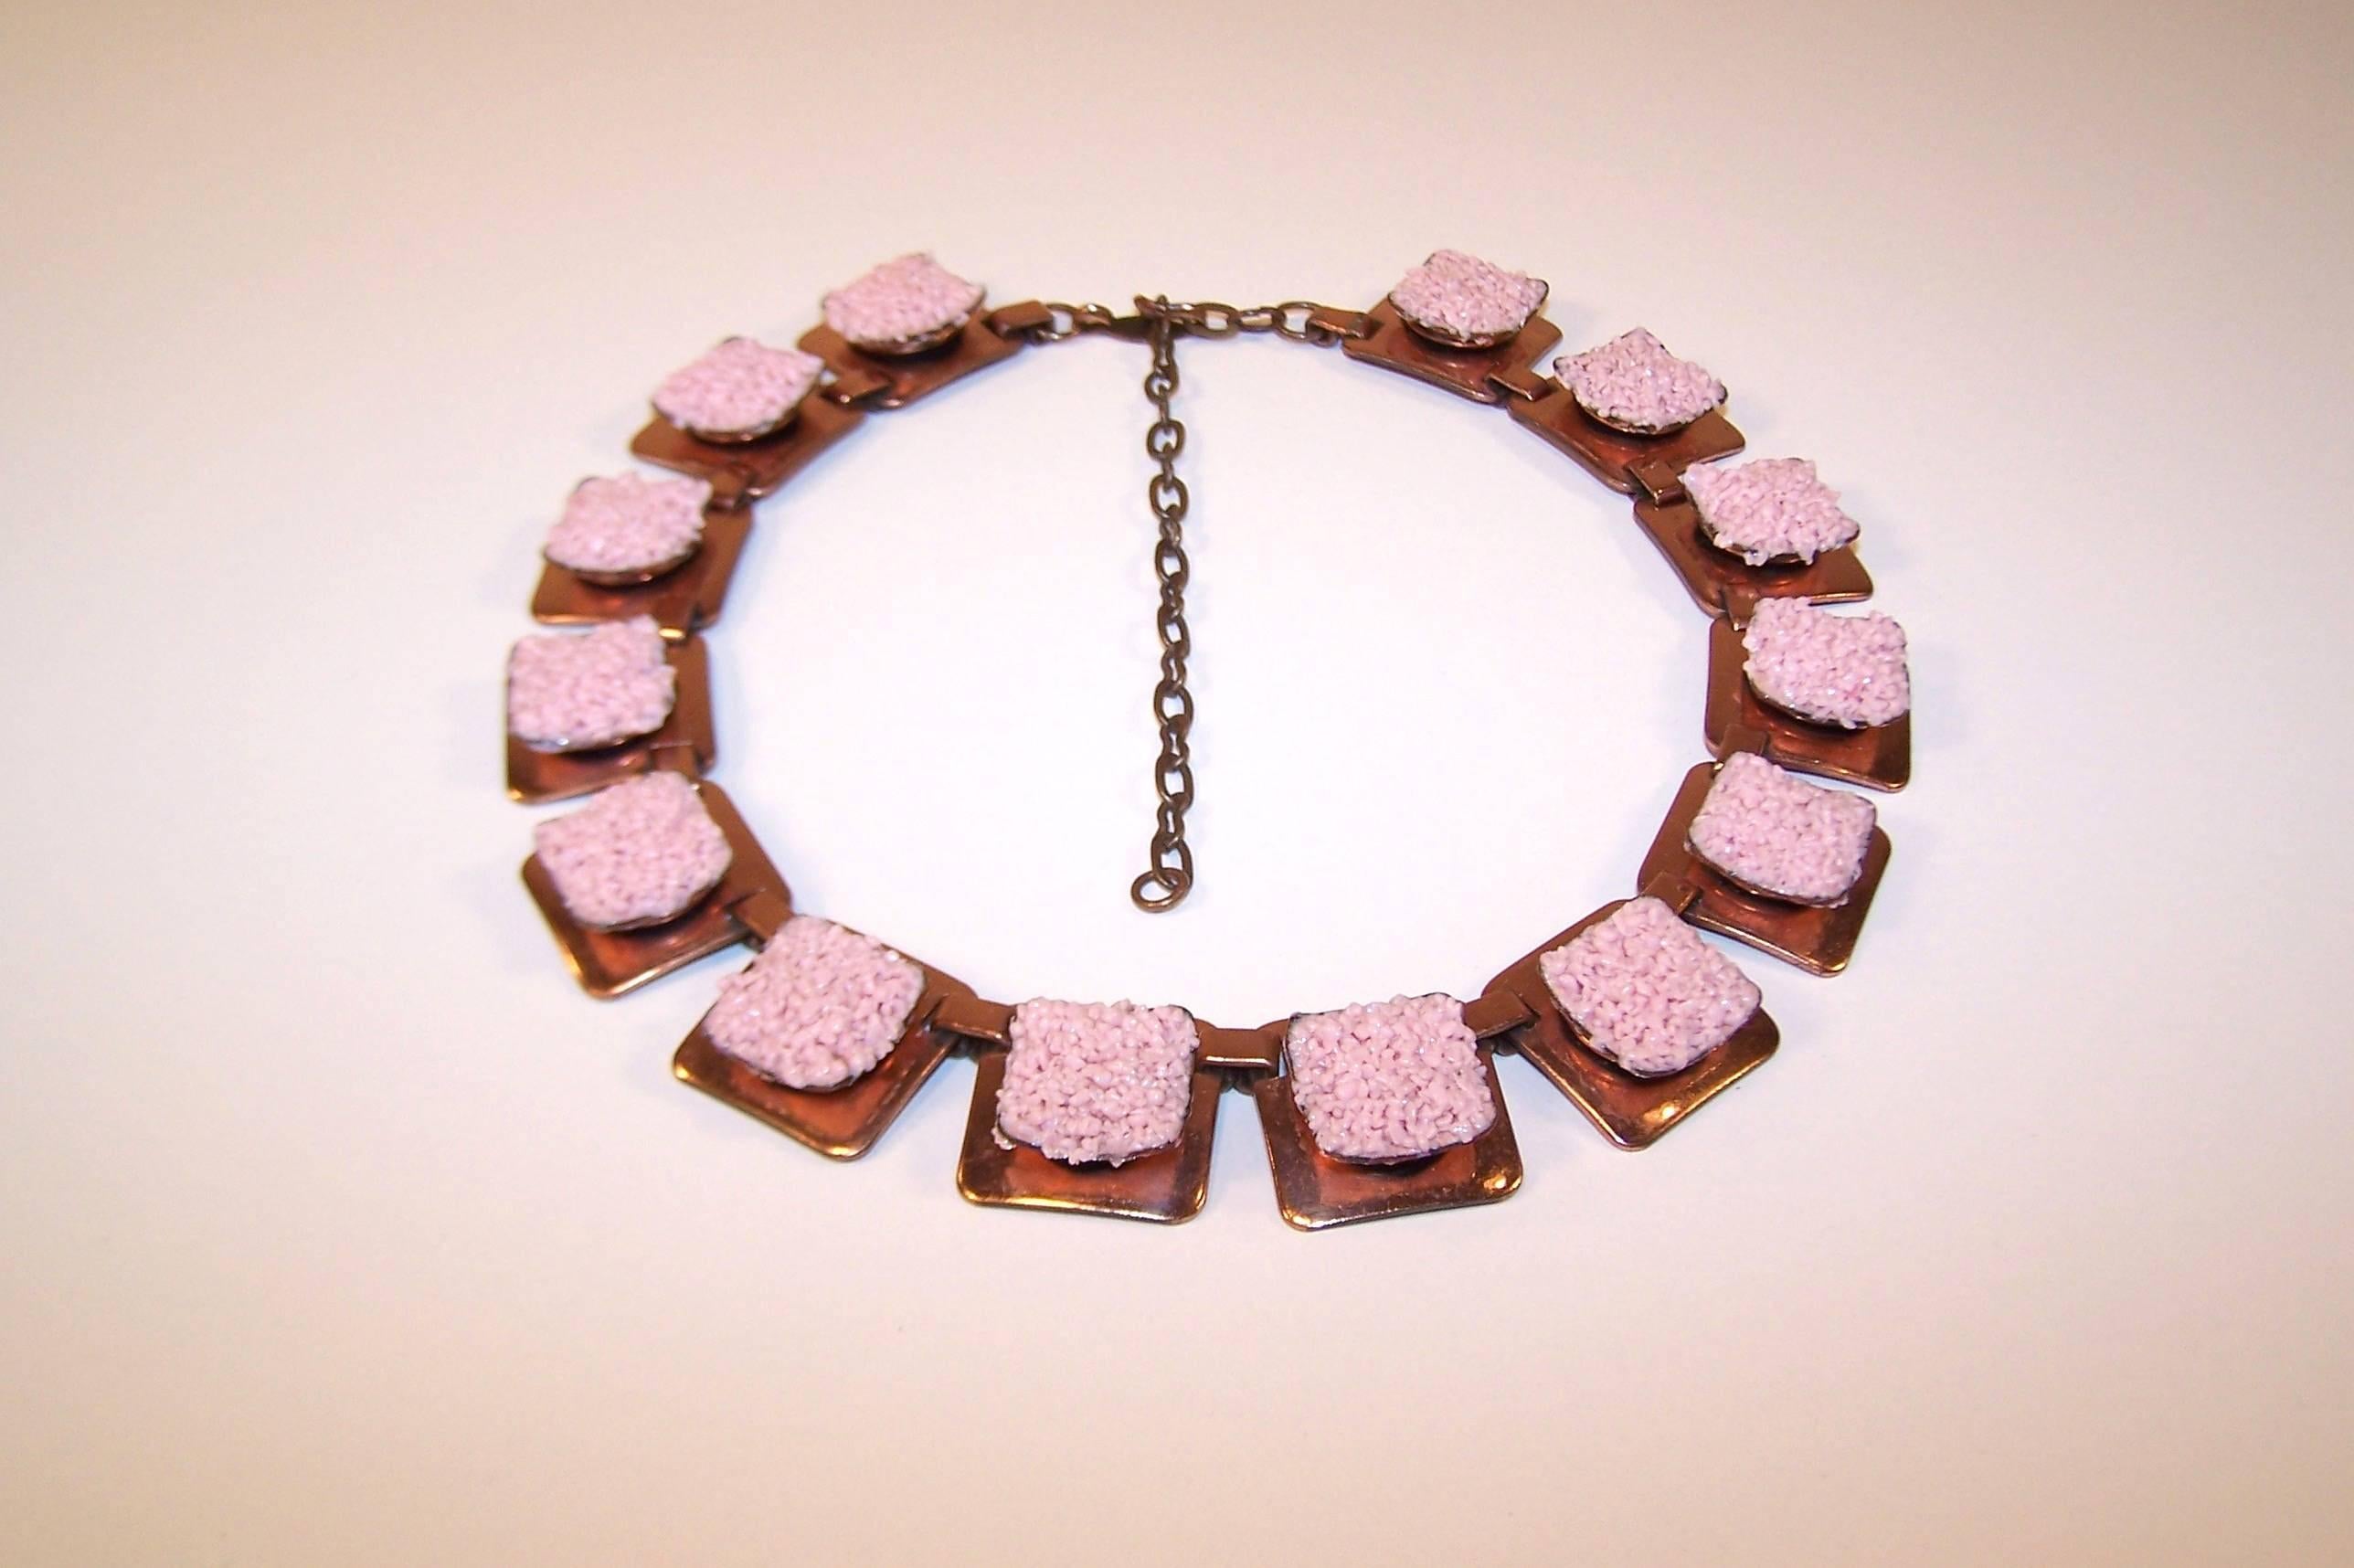 Visual texture abounds in this unique design by Matisse.  Each linked copper square is filled with pink enamel glass chips to create a beautiful mini mosaic.  The necklace measures 17